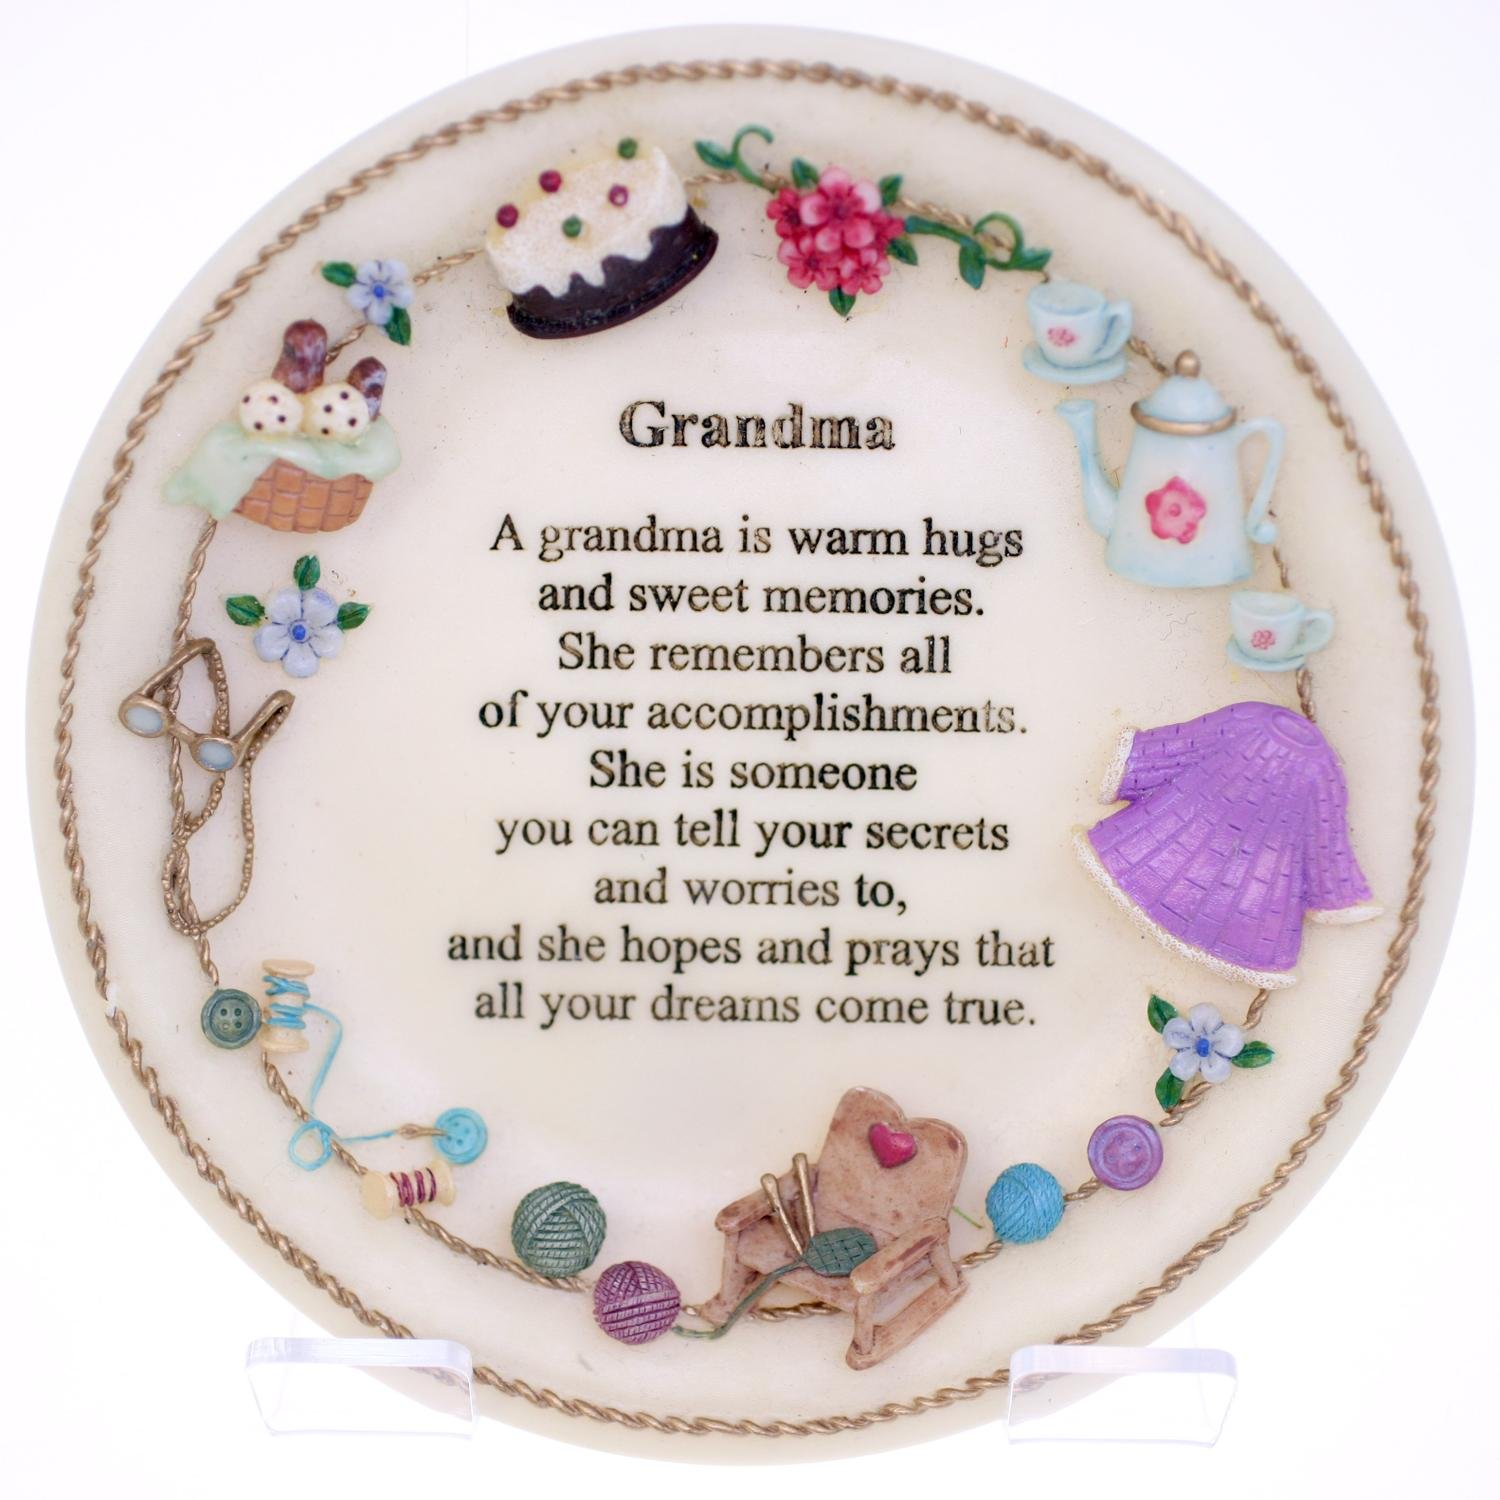 Grandma vintage hanging plate ornament with English text poem (Weight: 230g)